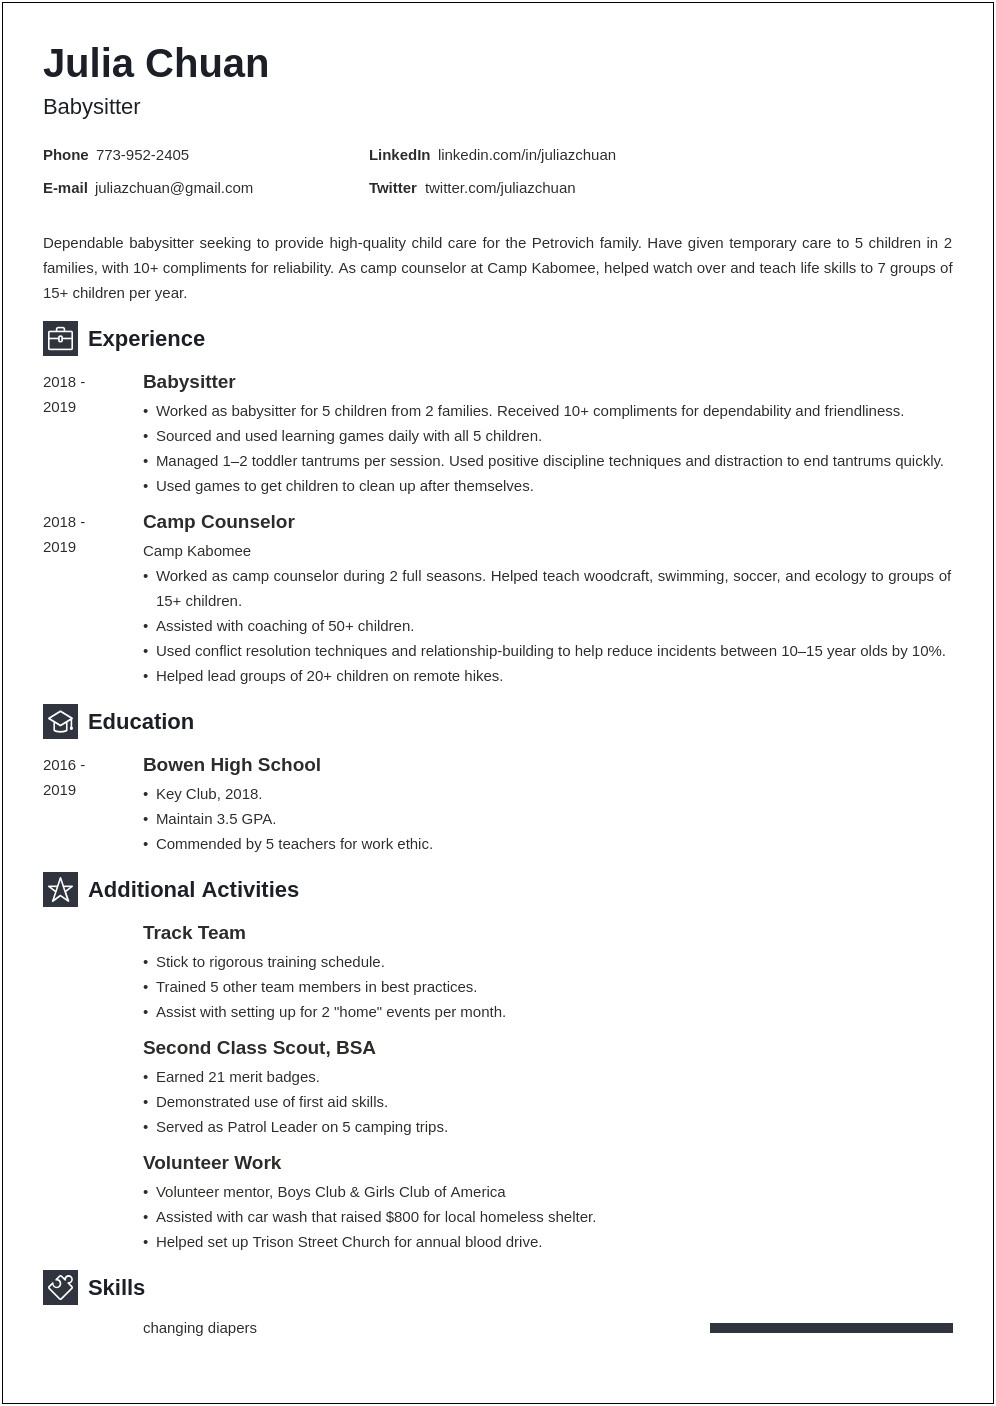 Resume Summary For An Early Childhood Educator